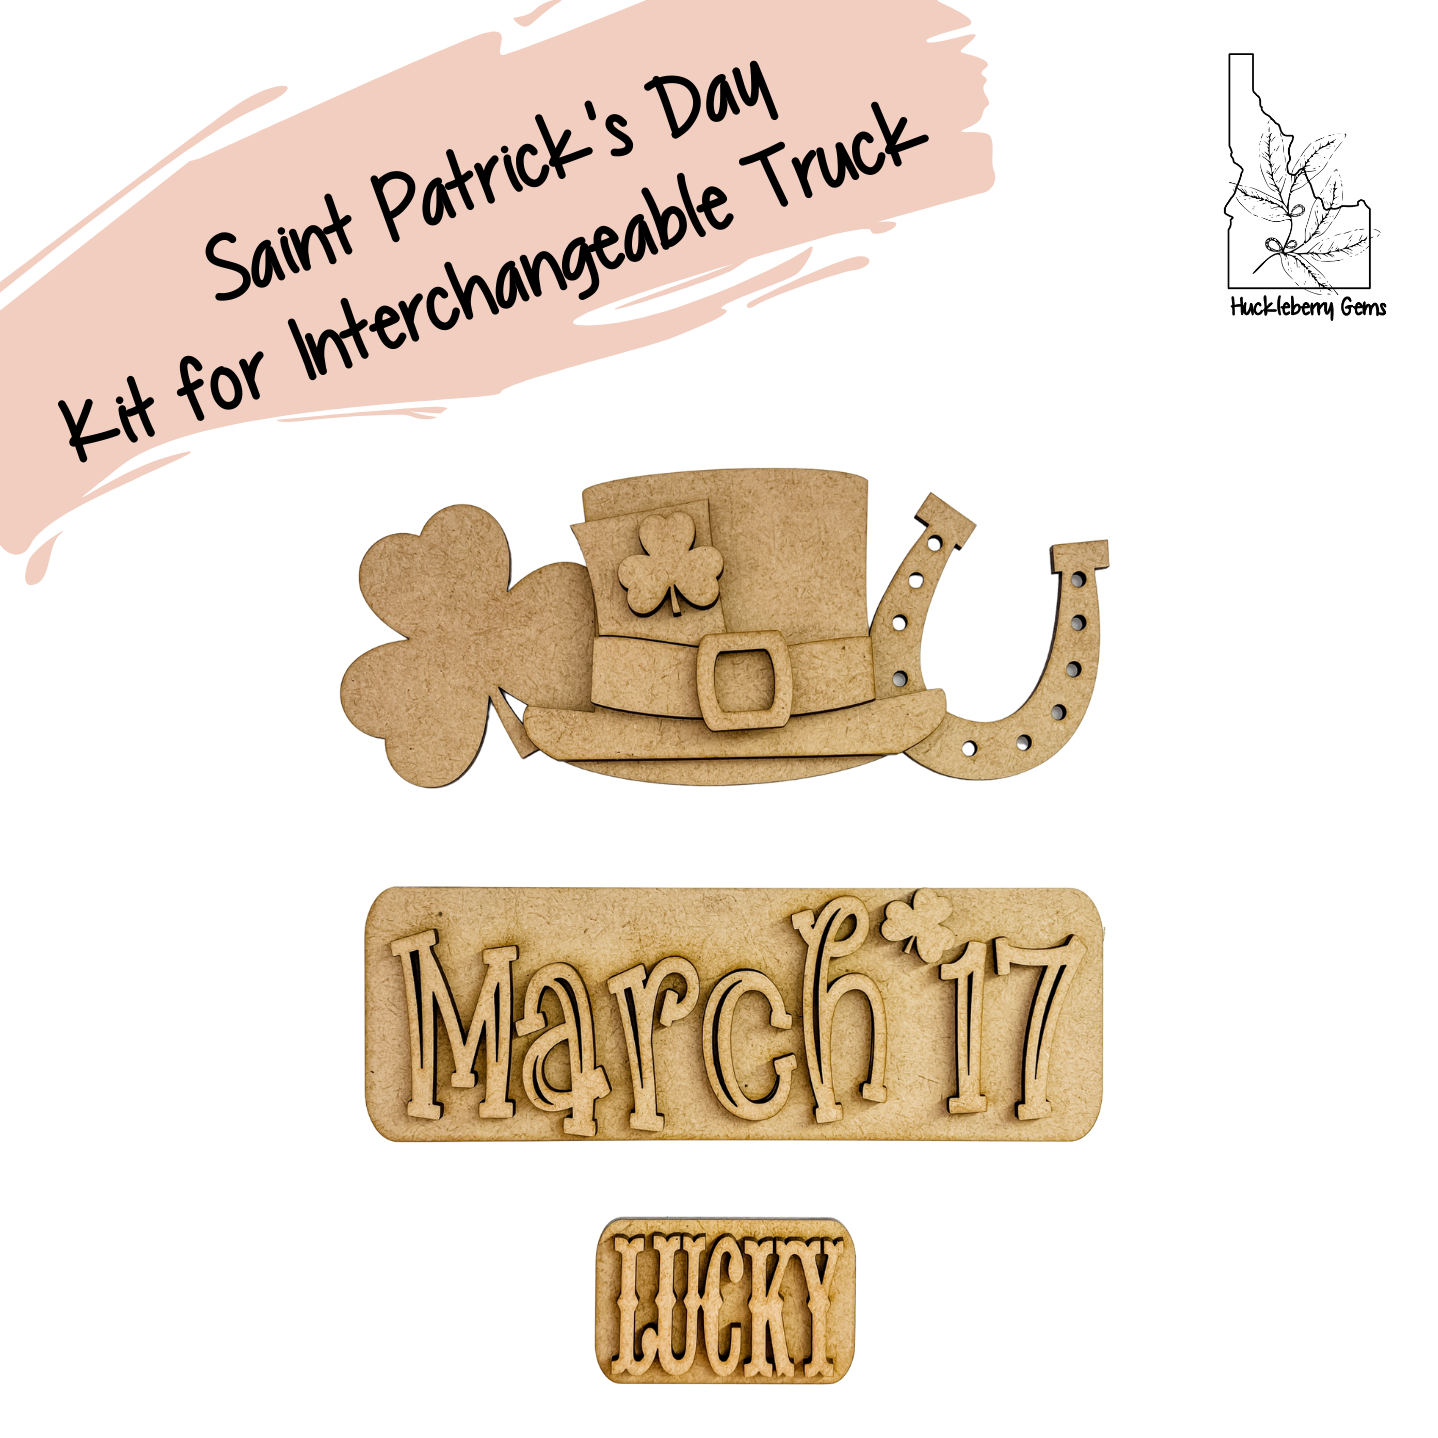 Saint Patrick's Day Interchangeable Truck Stand